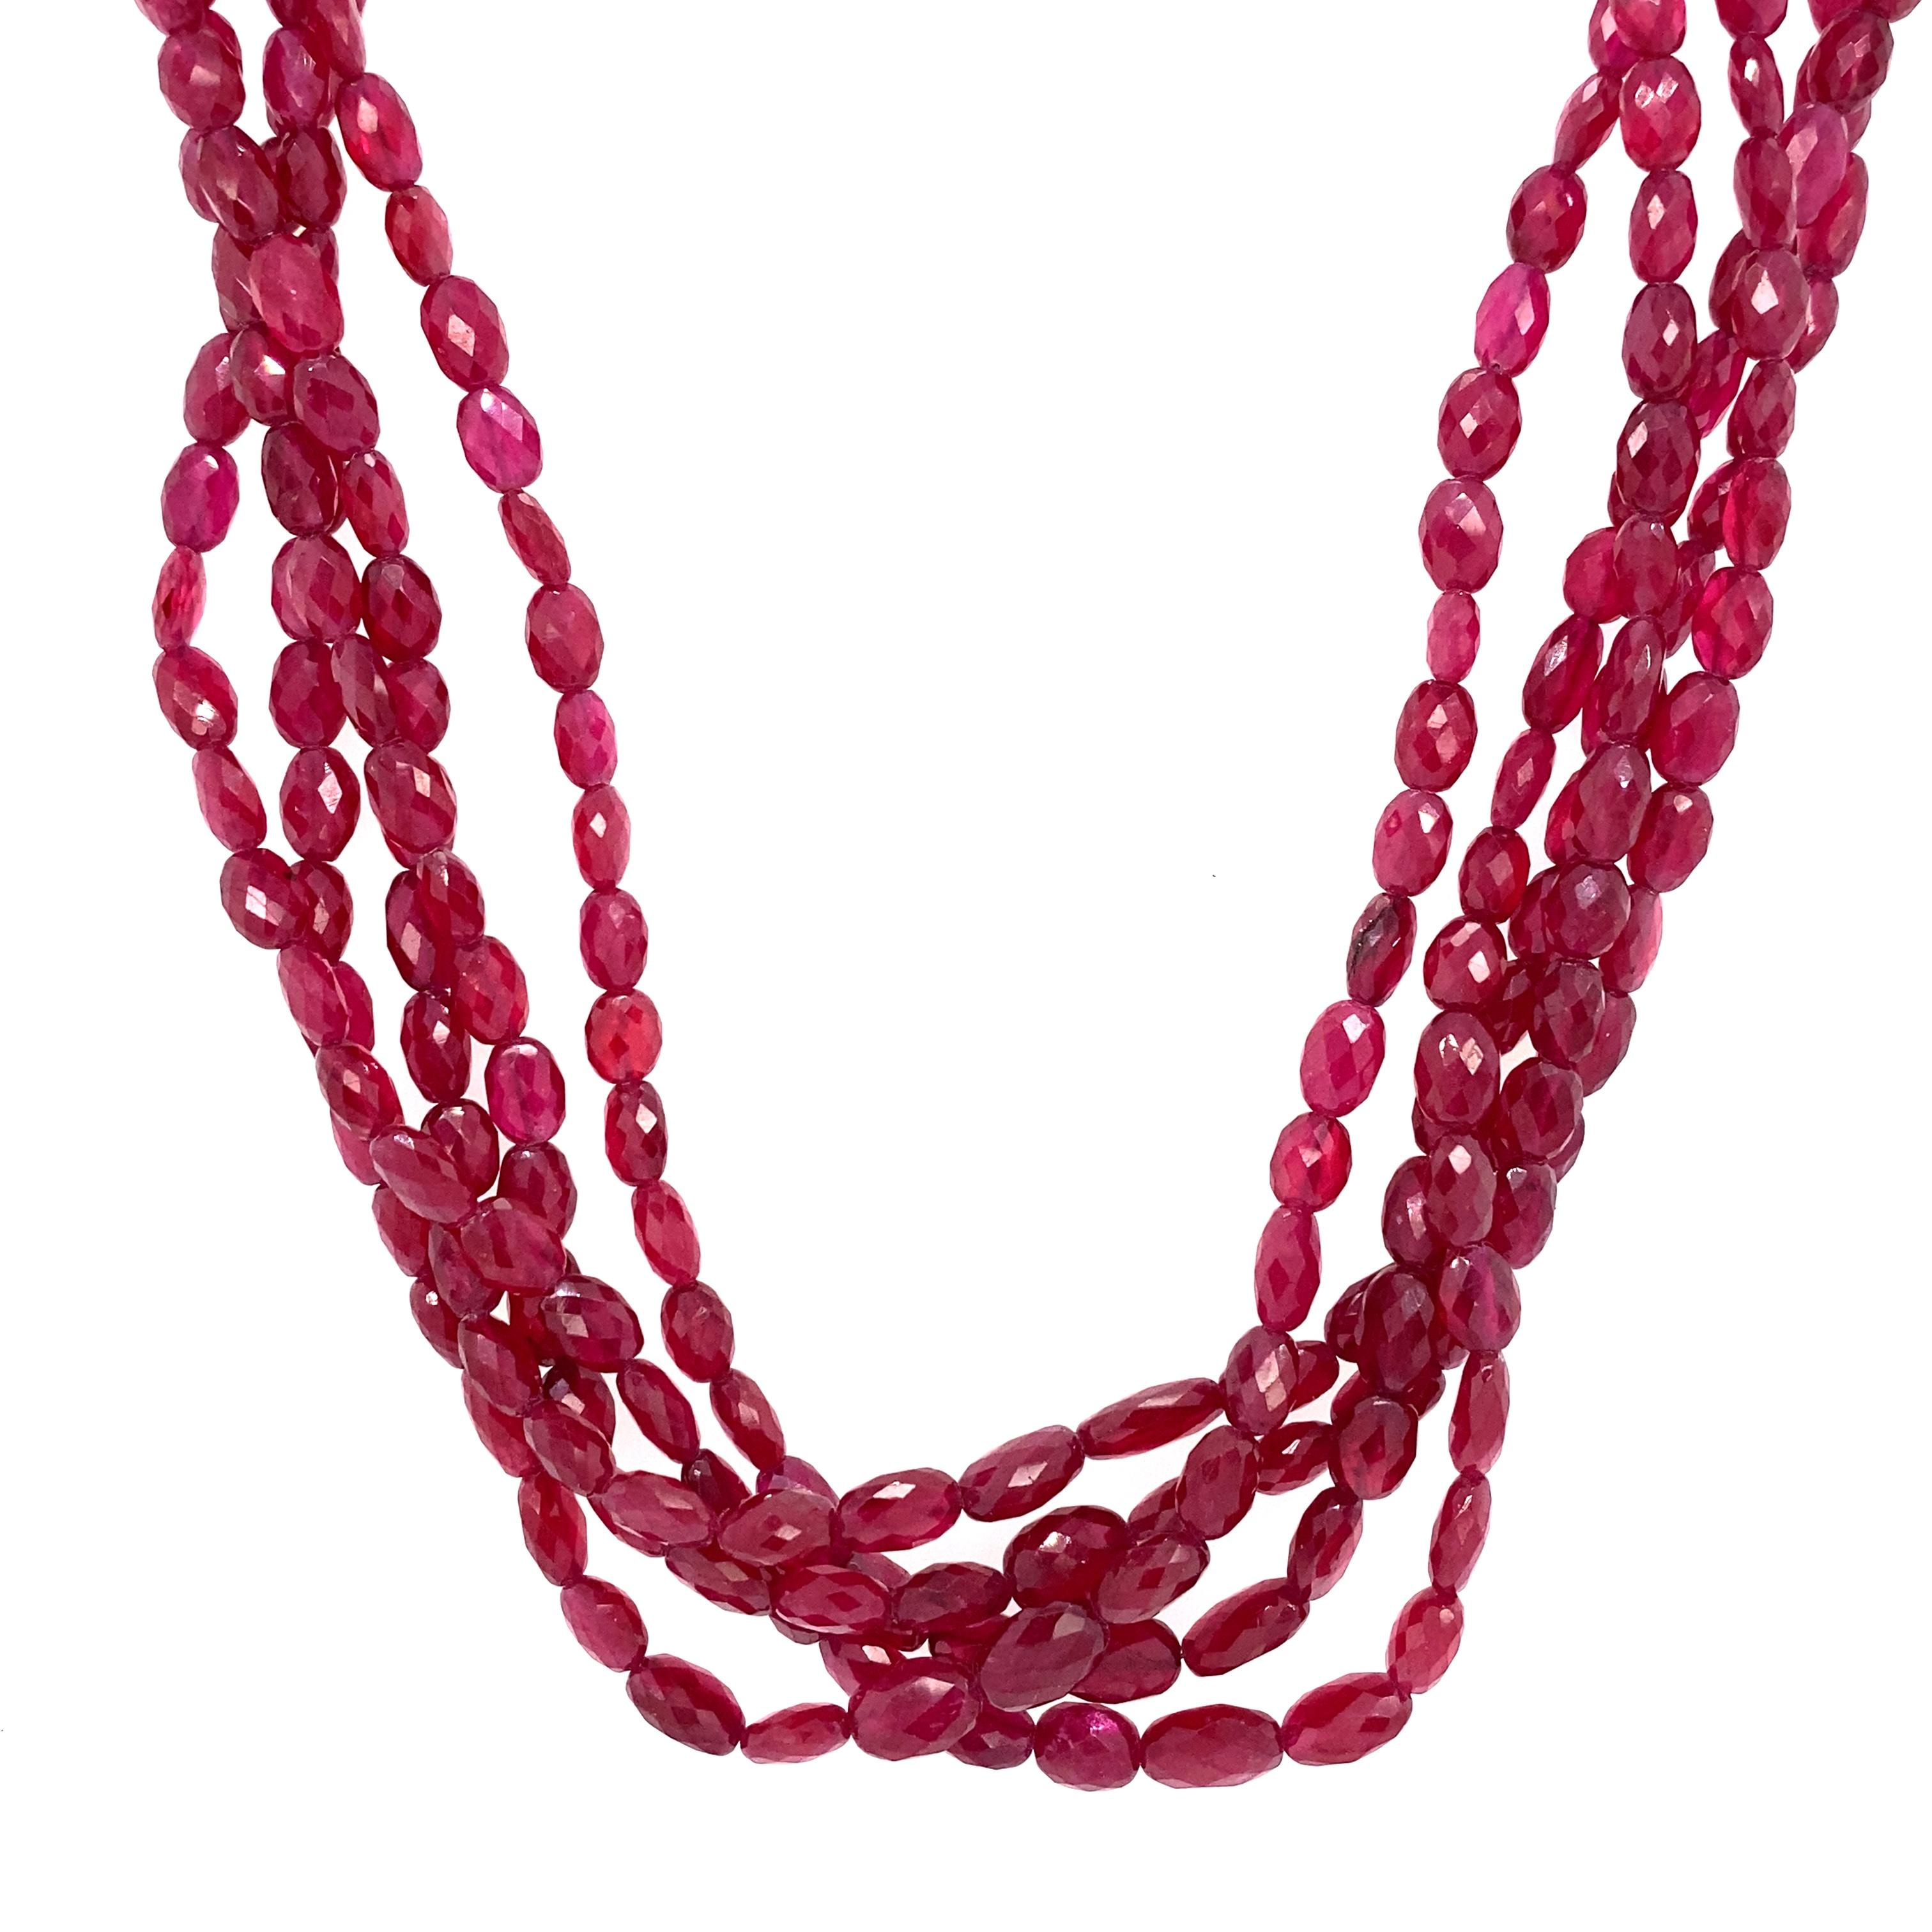 Circa: 1990s
Metal Type: 18 Karat Gold
Weight: 48 grams
Dimensions: 17 inch length 

Ruby Details:

Carat: Approximately 210 carat total weight
Shape: 5mm-6.5mm beads
Color: Vivid red